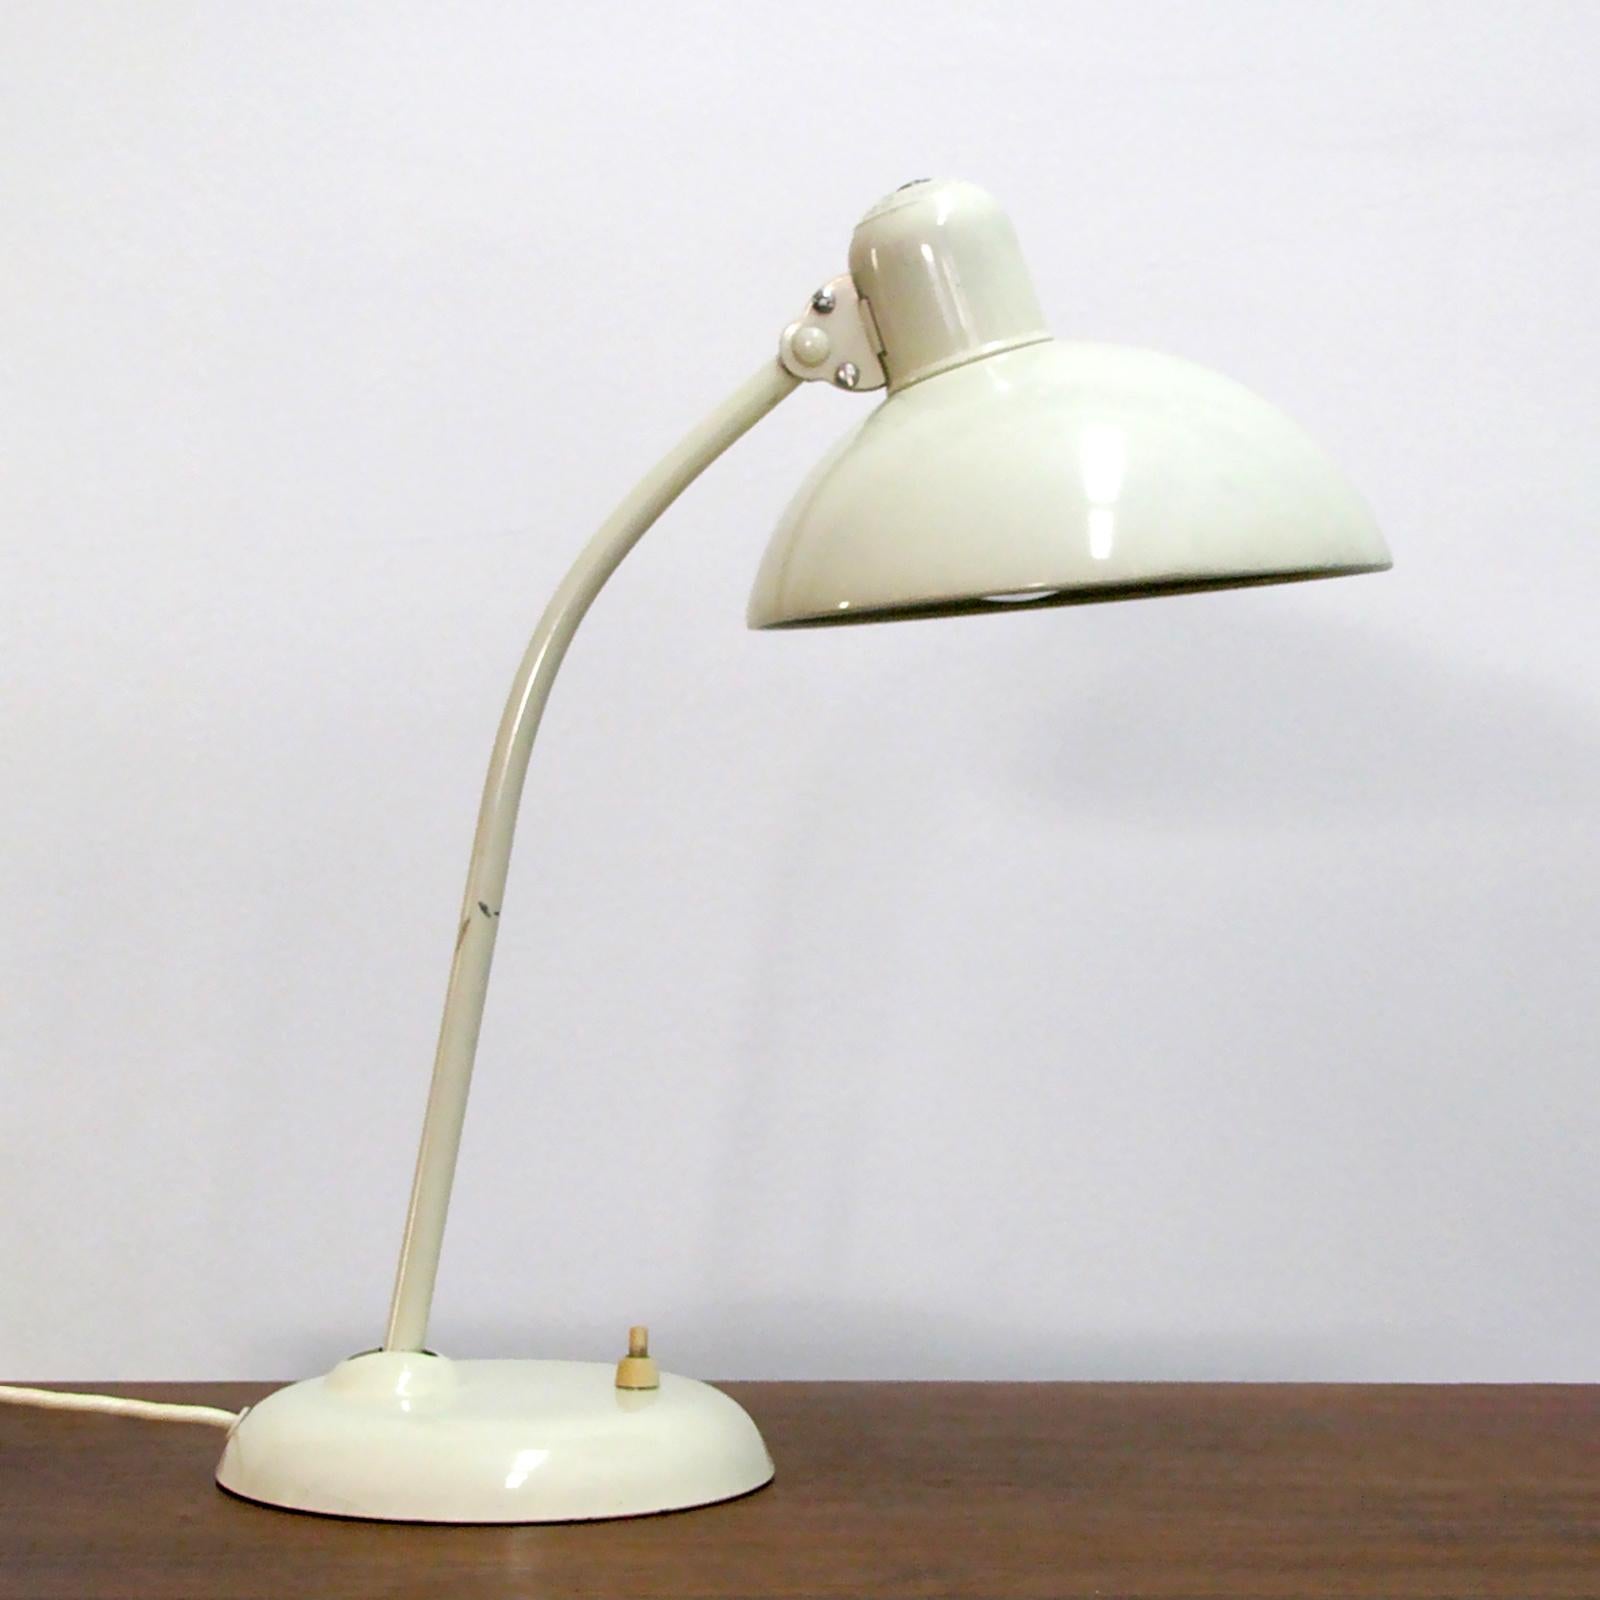 Original ivory enameled steel desk/ task lamps model '6556' by Christian Dell for Kaiser Idell, with a curved pivoting arm and a broad dome shade, marked. Wired for US standards, one E26 socket, max. wattage 75w or LED equivalent, bulb provided as a